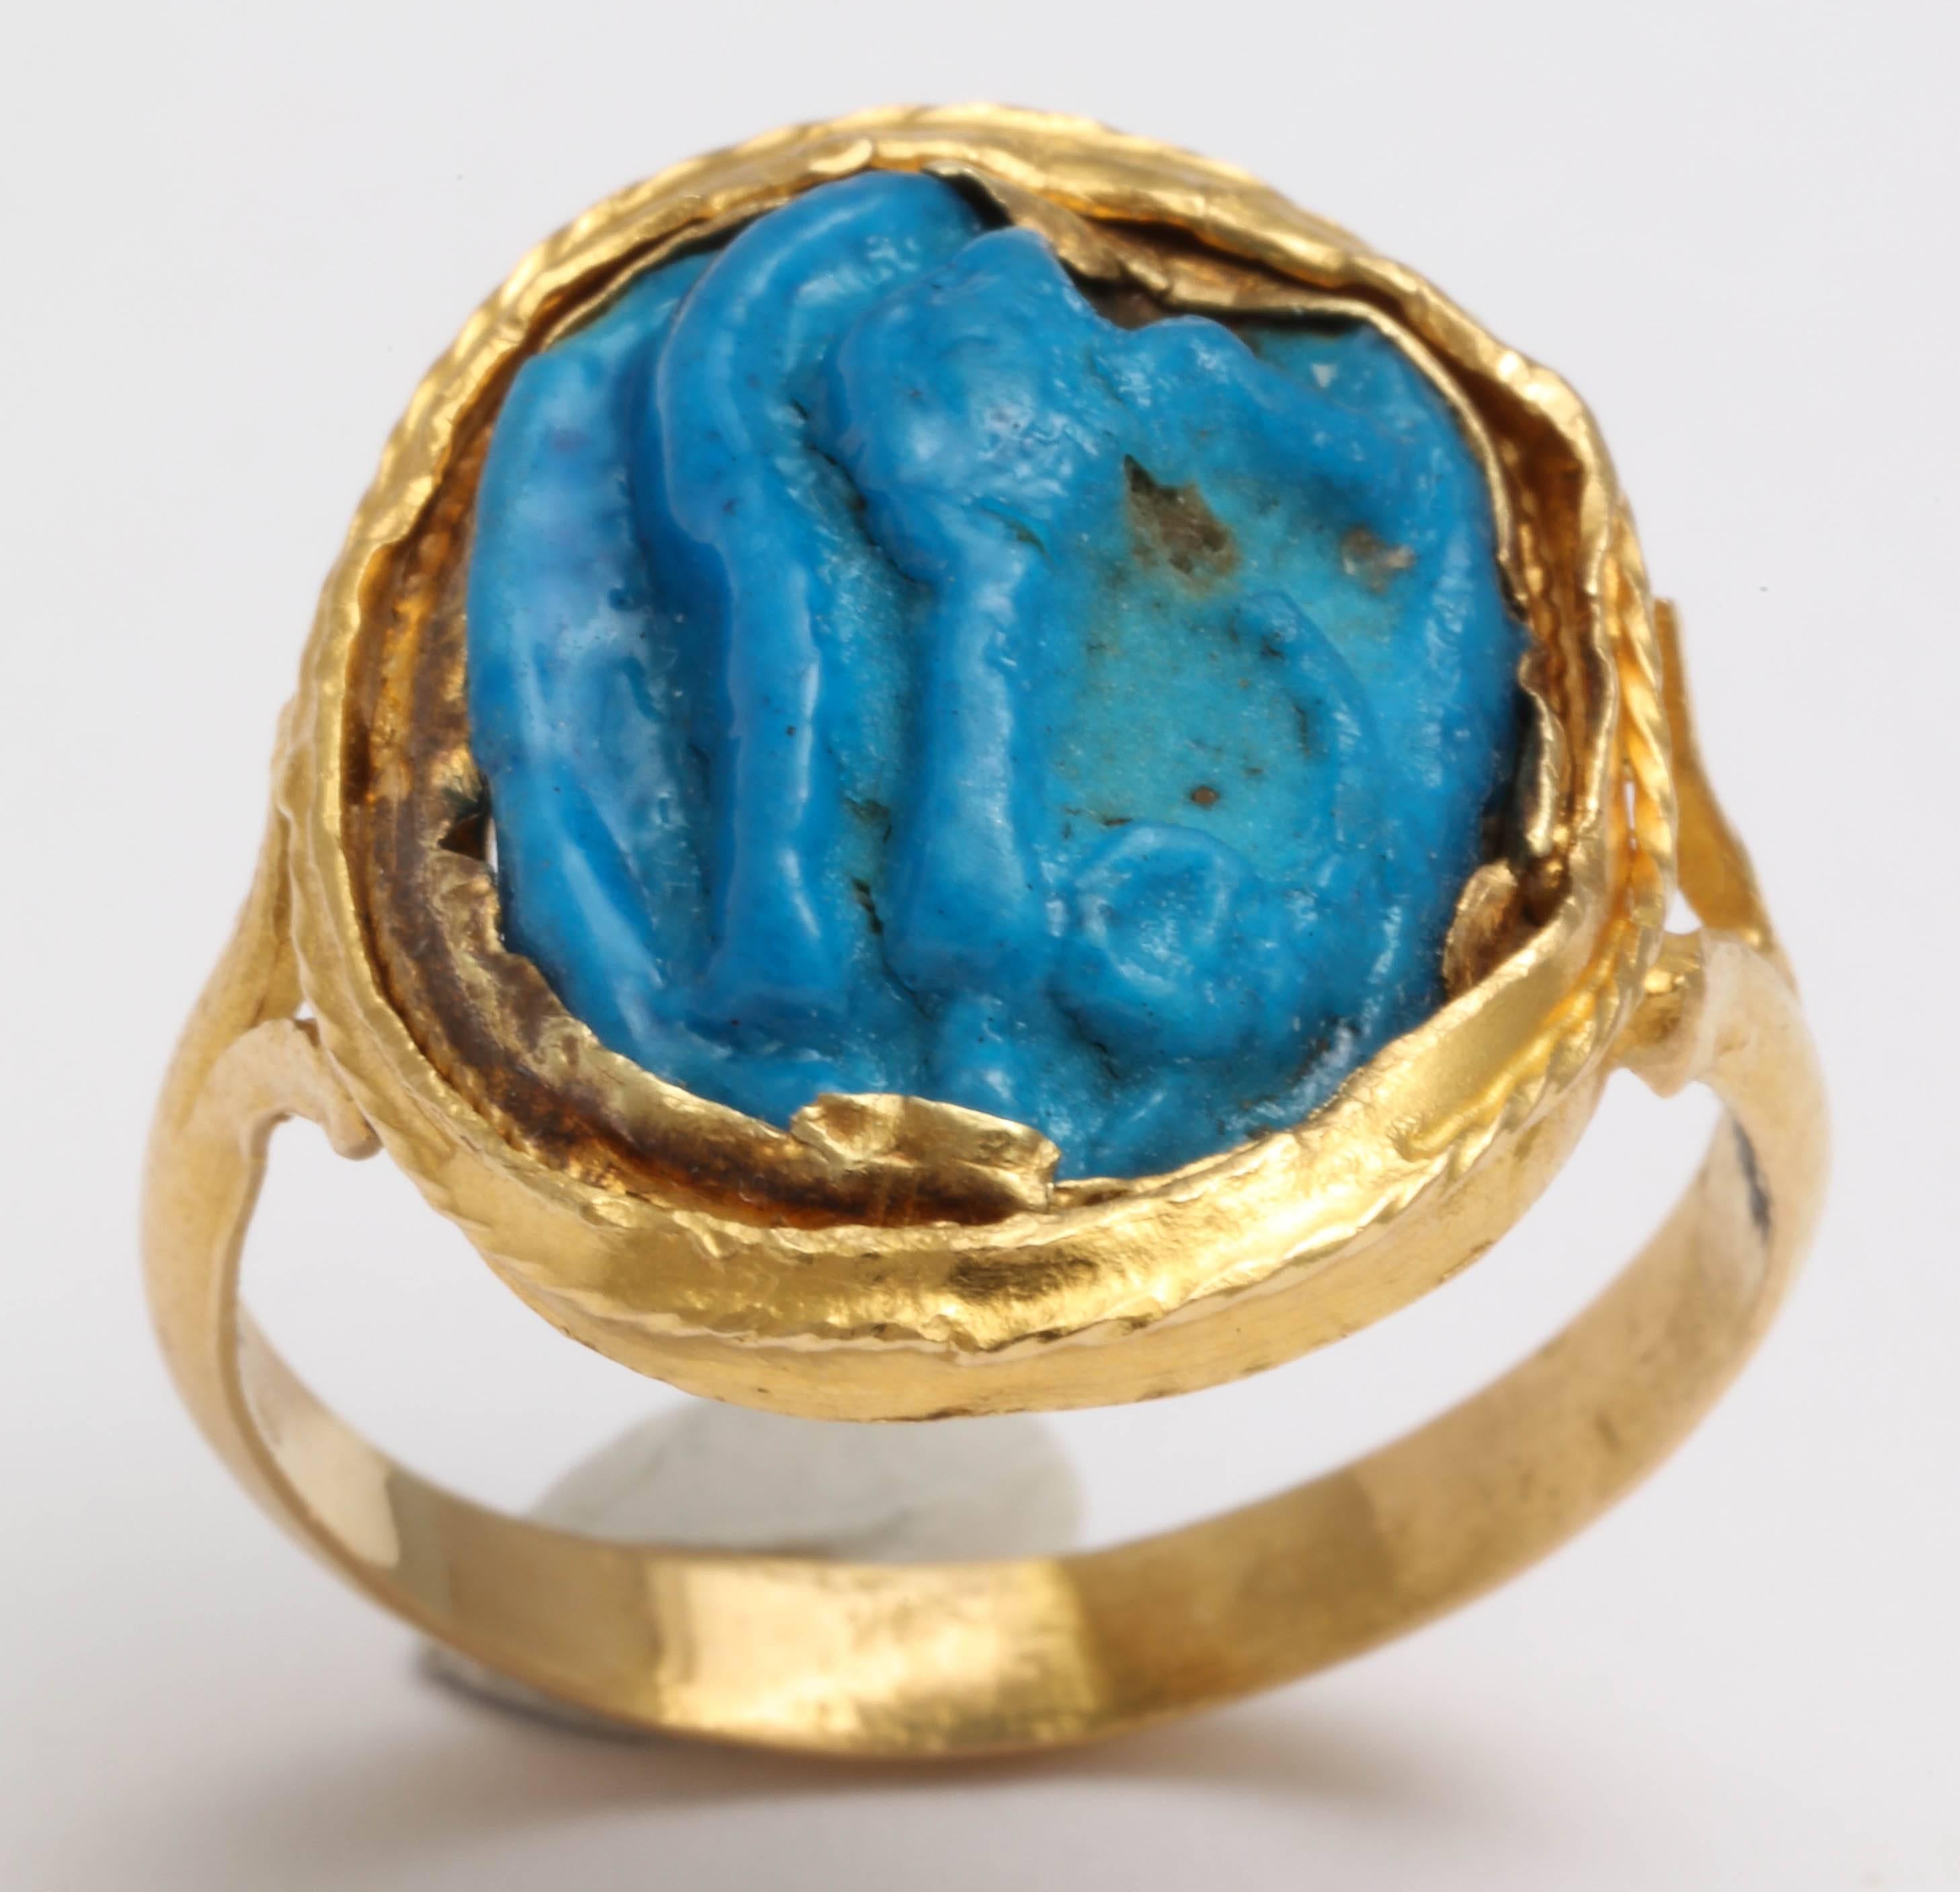 Women's or Men's Ancient Egyptian Faience Eye Amulet Mounted as a Gold ring